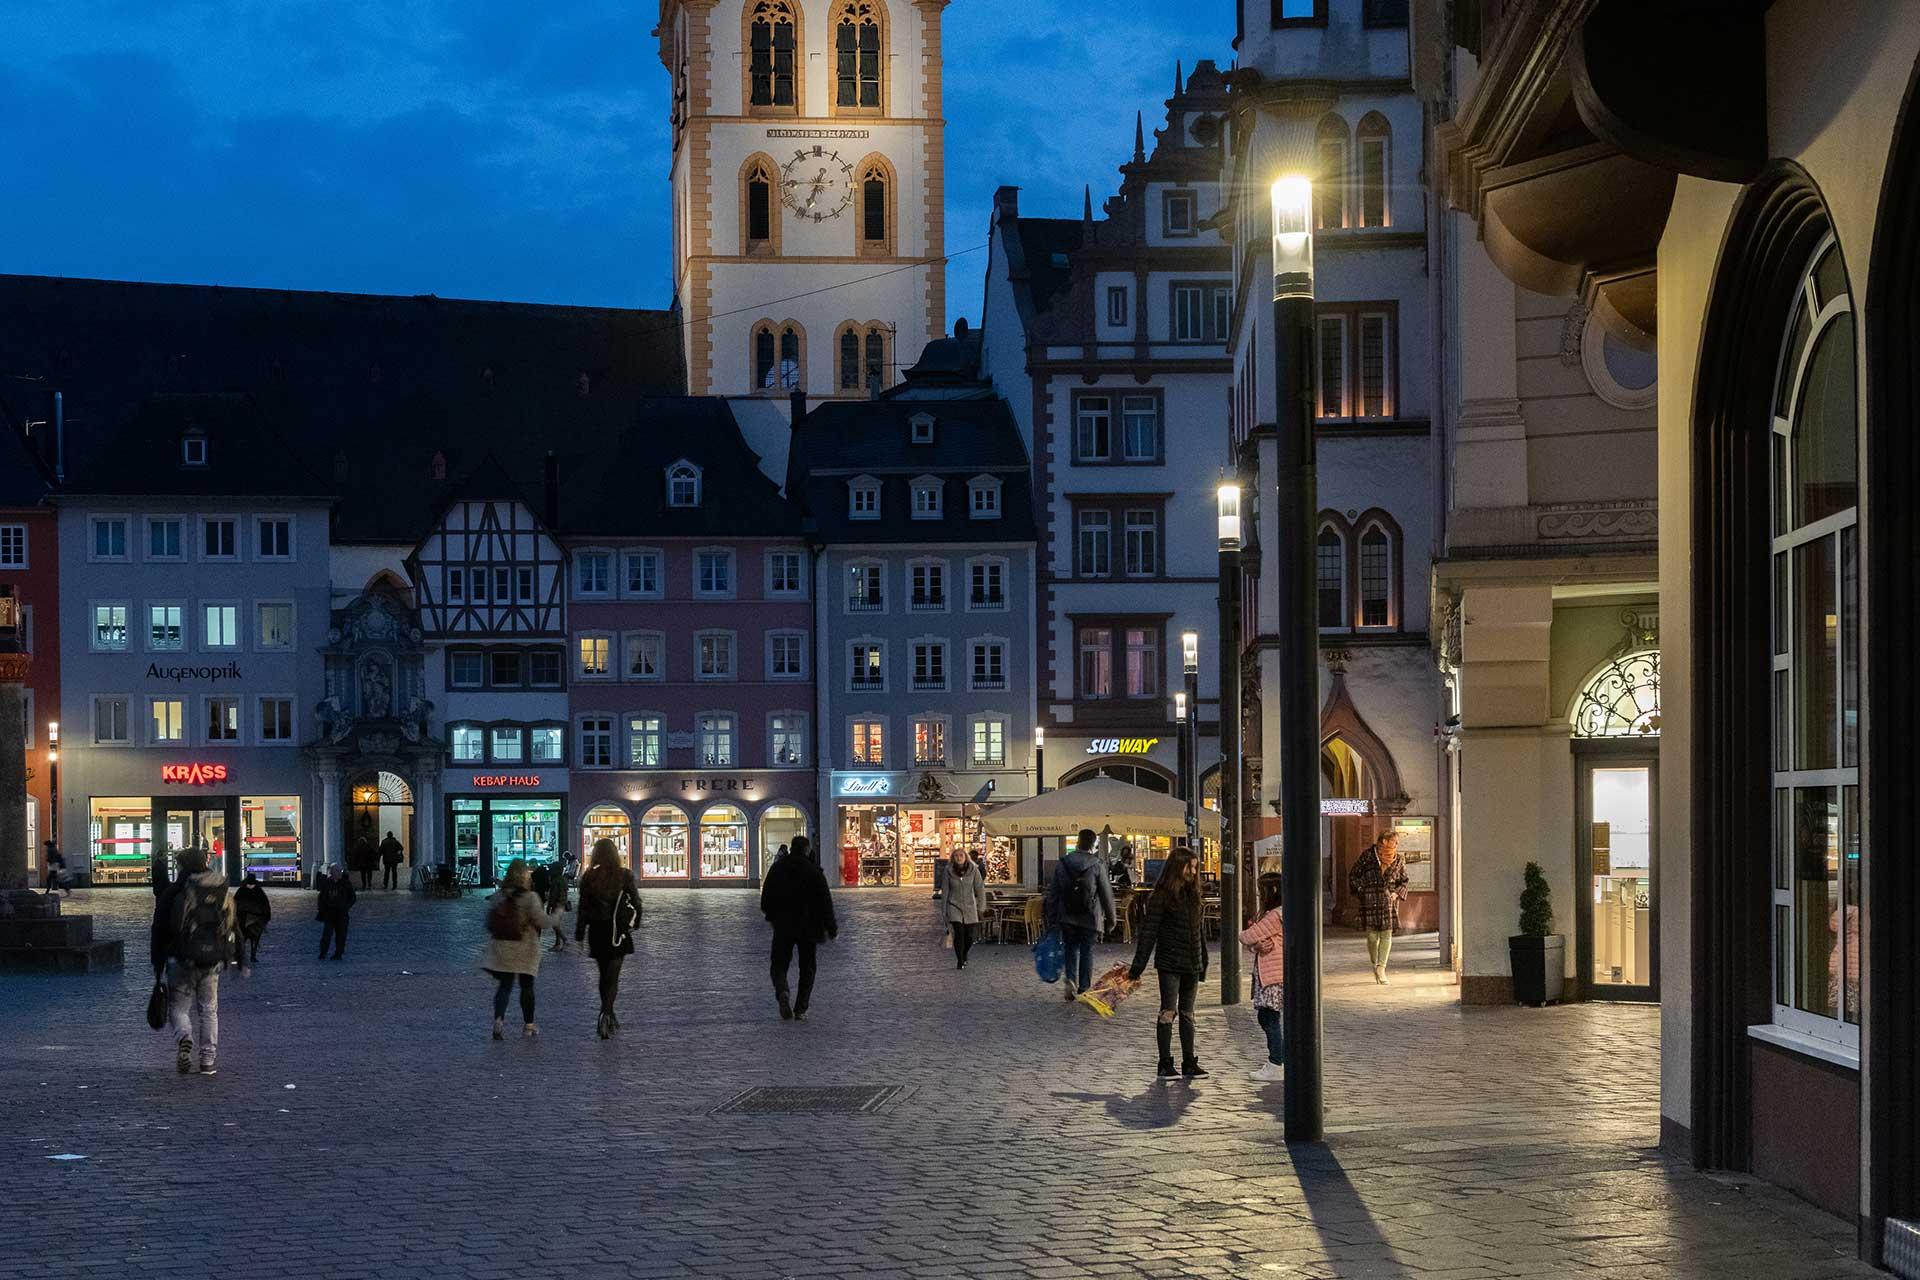 Shuffle delivers a gentle white light for a safe and enjoyable nocturnal experience in Trier